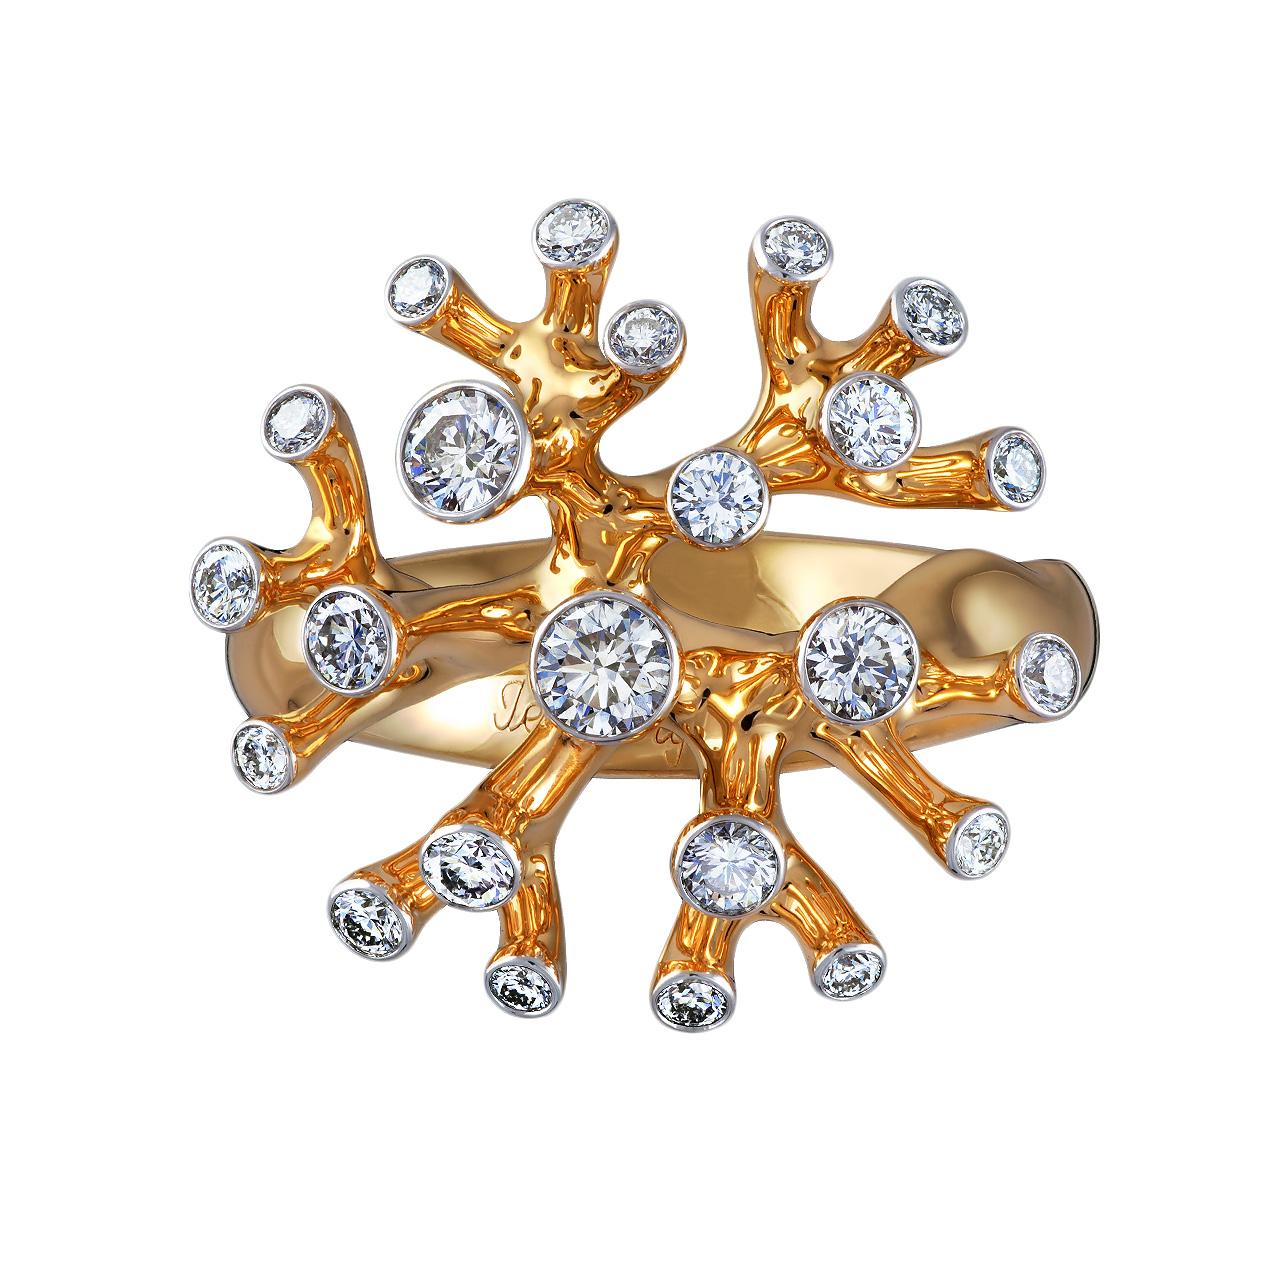 - 24 Round Diamonds - 0.84 ct, E-F/VS
- 18K Yellow Gold 
- Weight: 11.02 g
- Size: 16.5 mm
- US size: 6
The ring from the Corals collection of Jewellery Theatre in 18k yellow gold is decorated 0.84 ct of diamonds. Ring has a heel at the bottom